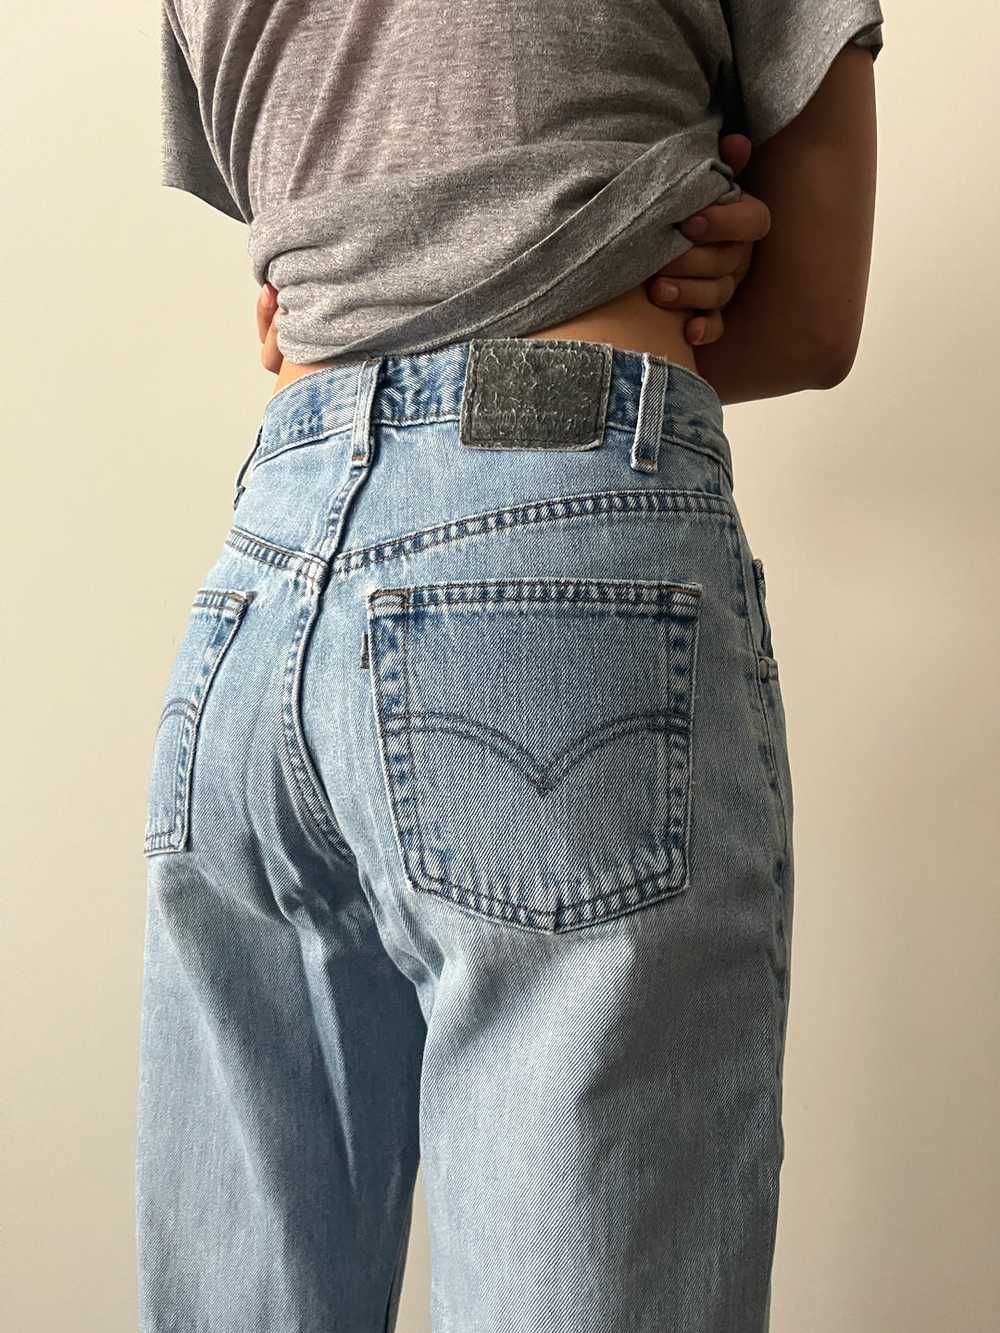 90s Levis Silvertab Jeans - image 6